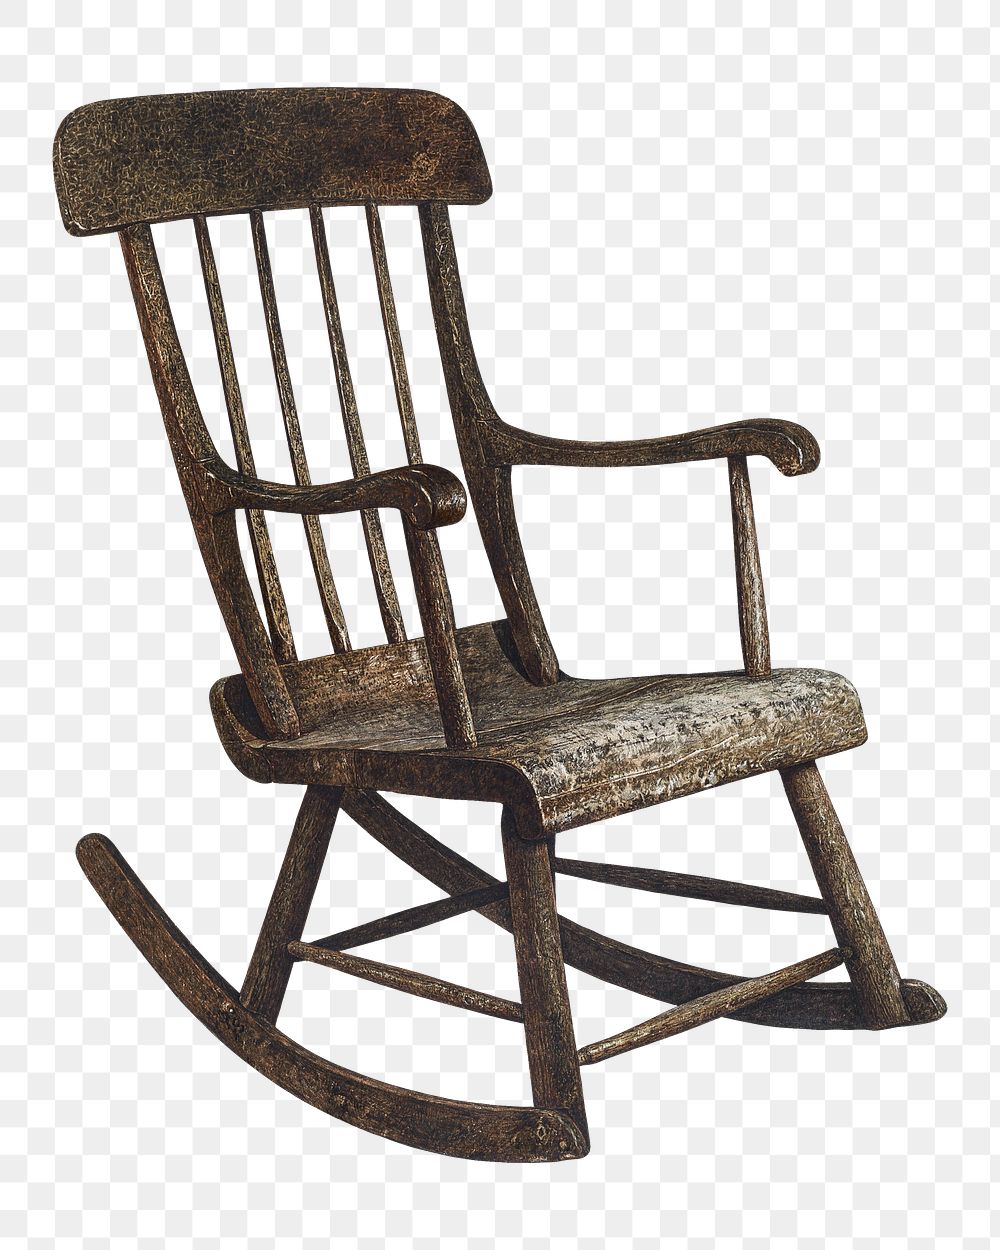 Rocking chair png on transparent background, remixed by rawpixel